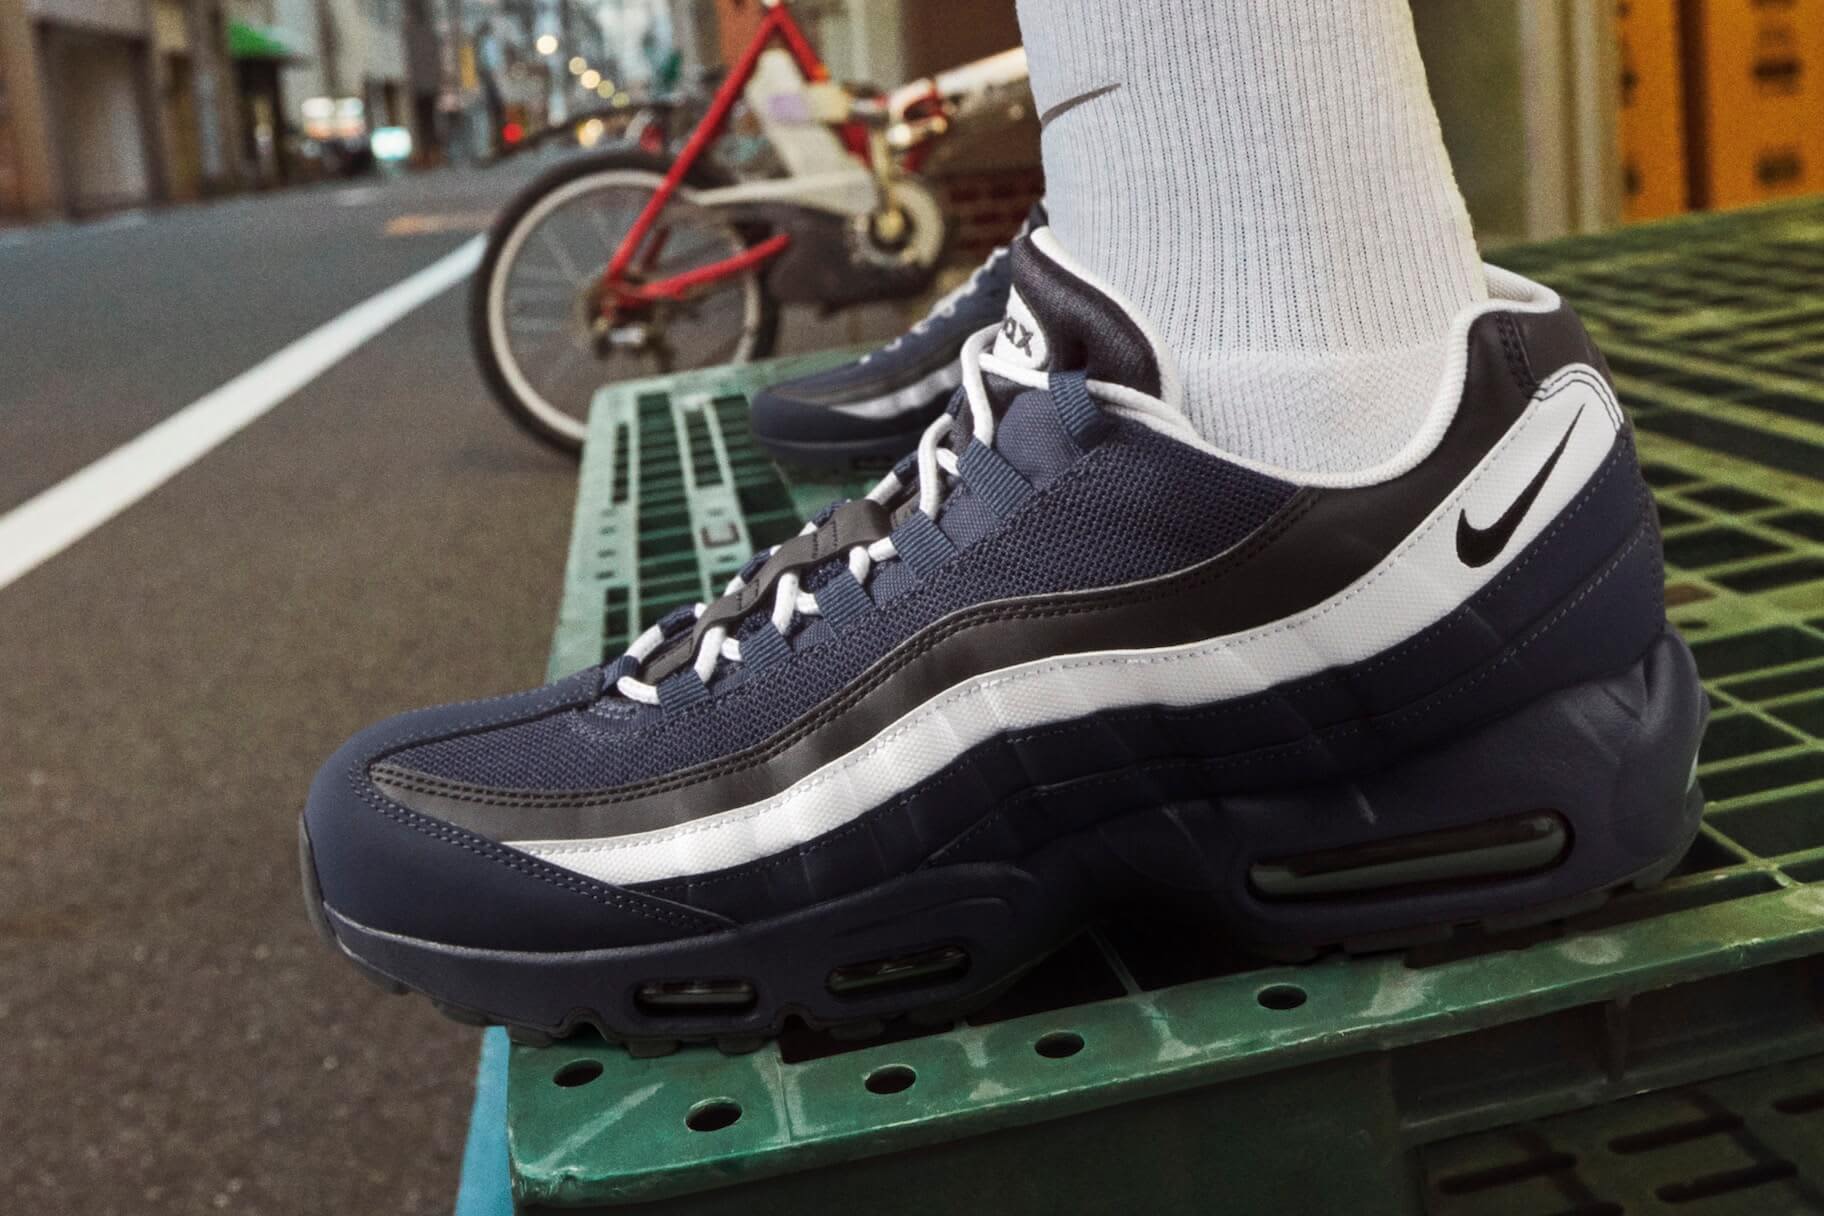 The Best Nike Shoes to Look Taller